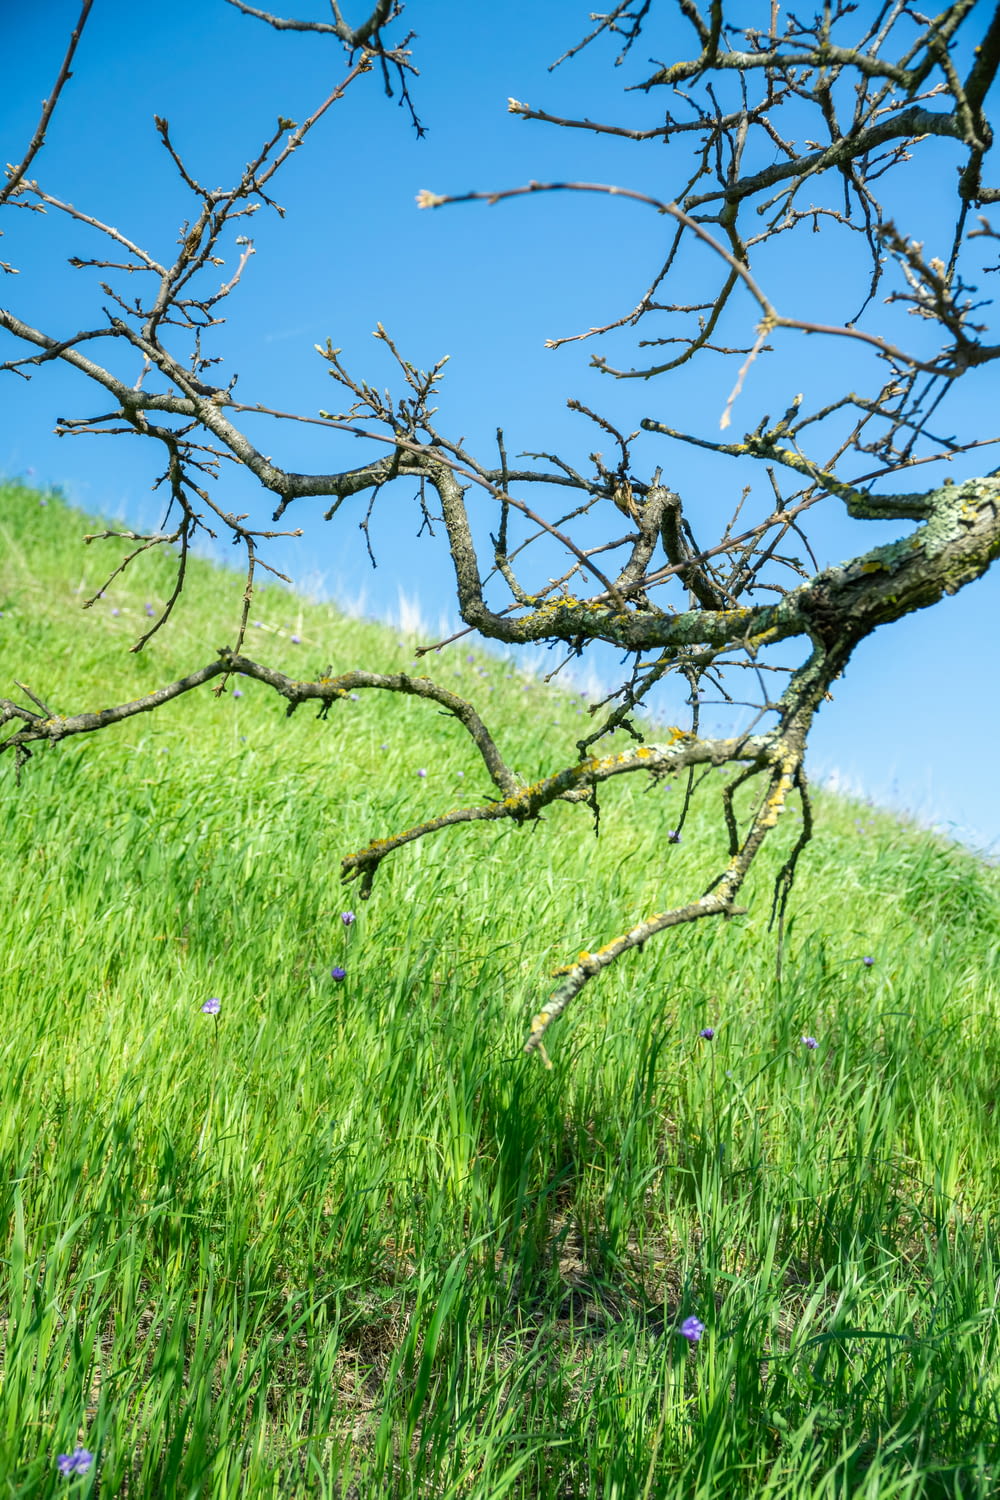 a bare tree in a grassy field with a blue sky in the background